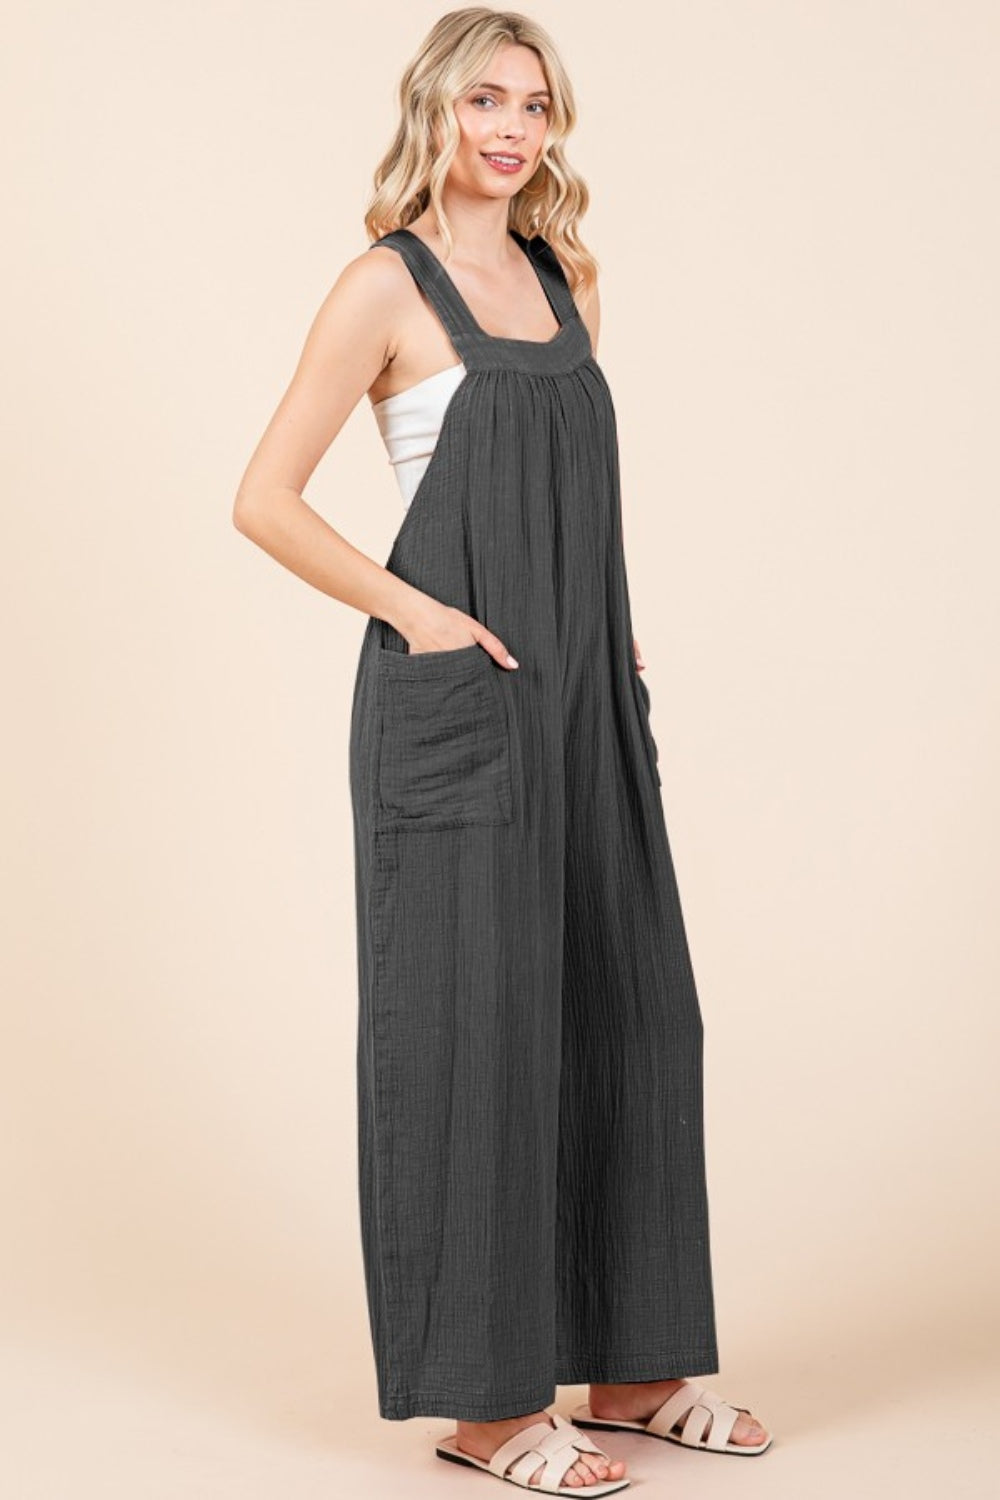 Culture Code Pocketed Sleeveless Wide Leg Overalls